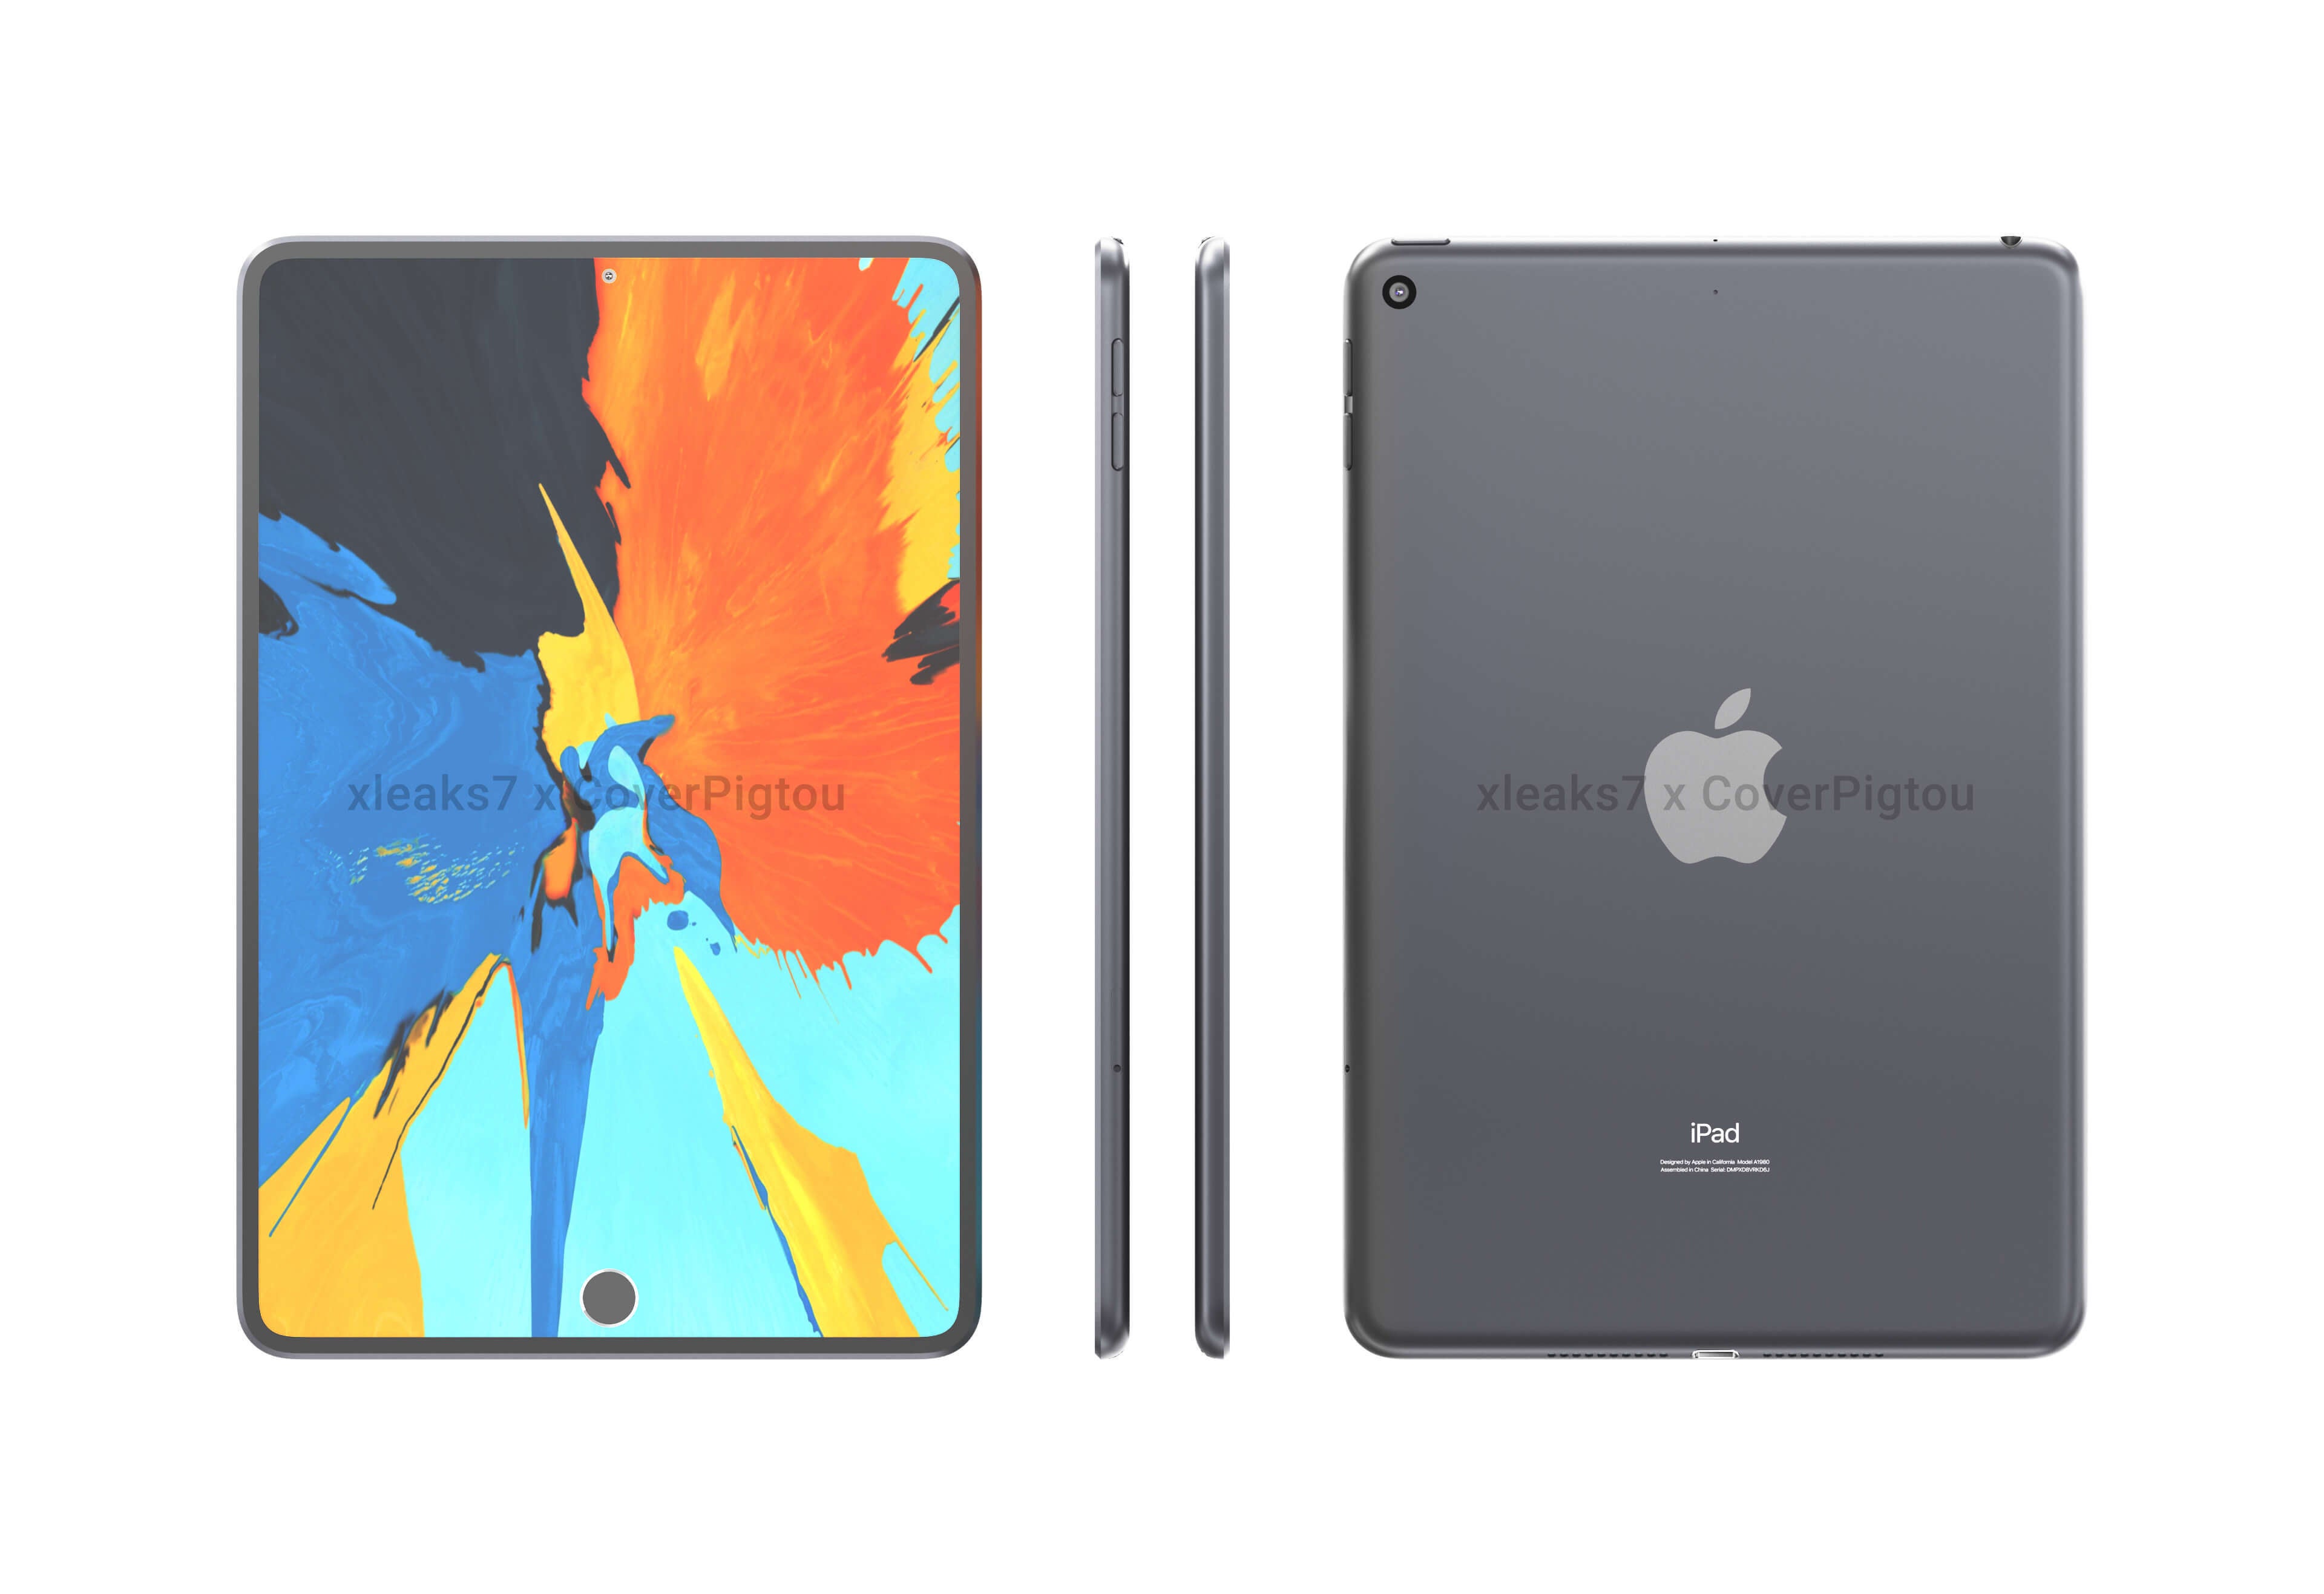 Alleged CAD-based renders of the iPad mini 6 - Sketchy iPad mini 6 leak points towards in-screen Touch ID, punch-hole camera